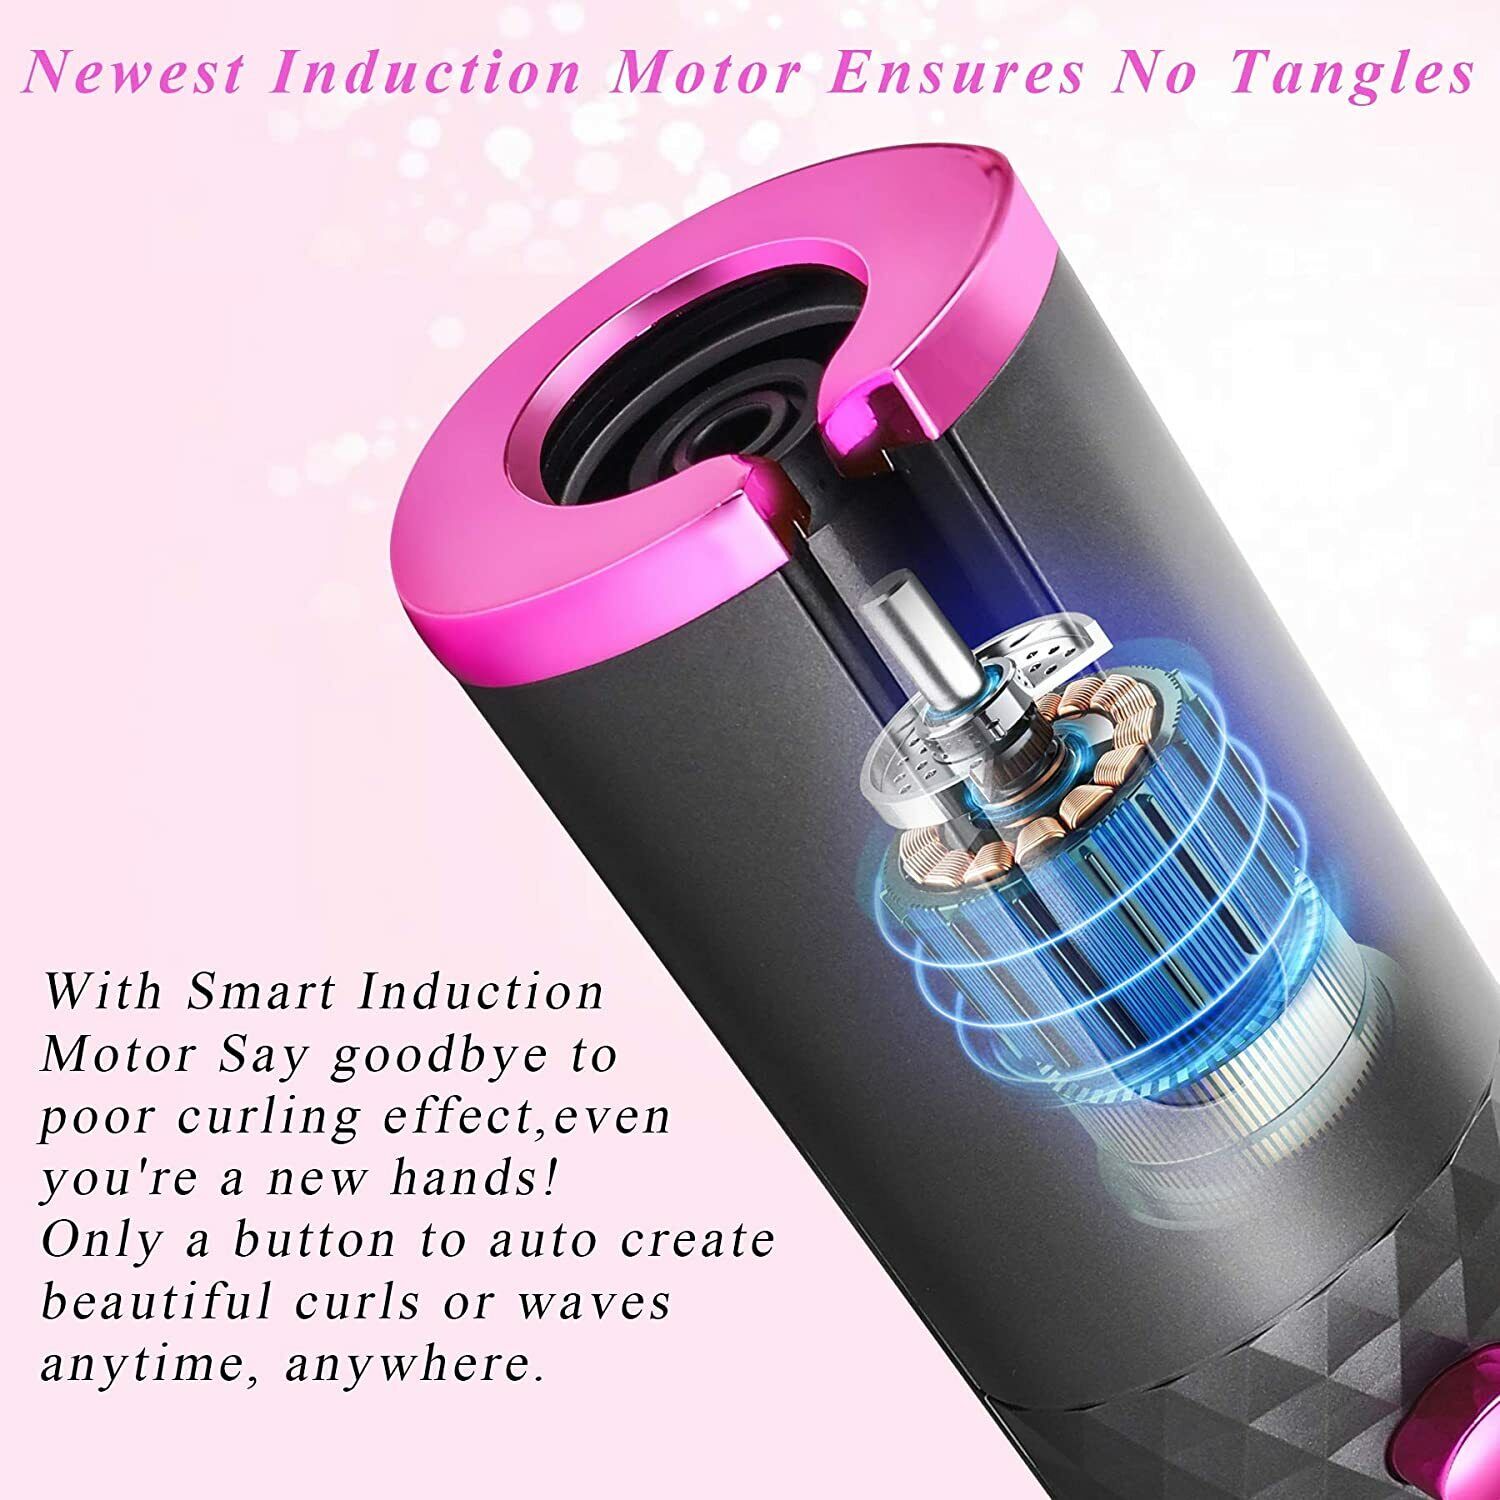 Cordless Hair Curler LCD Cordless Auto Rotating in Ceramic